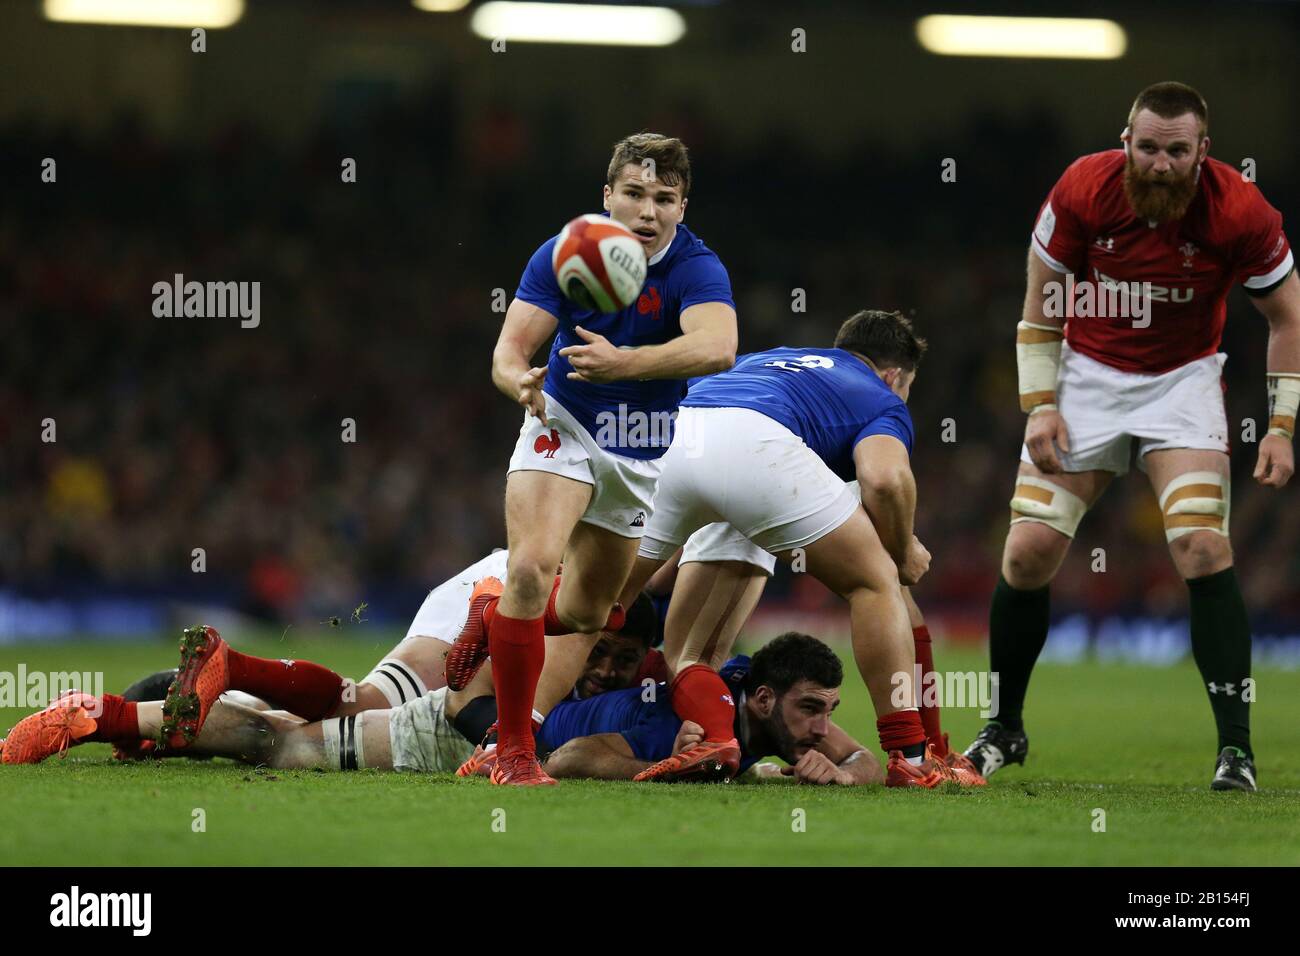 Cardiff, UK. 22nd Feb, 2020. Antoine Dupont of France in action. Wales v France, Guinness Six Nations championship 2020 international rugby match at the Principality Stadium in Cardiff, Wales, UK on Saturday 22nd February 2020. pic by Andrew Orchard/Alamy Live News PLEASE NOTE PICTURE AVAILABLE FOR EDITORIAL USE ONLY Stock Photo